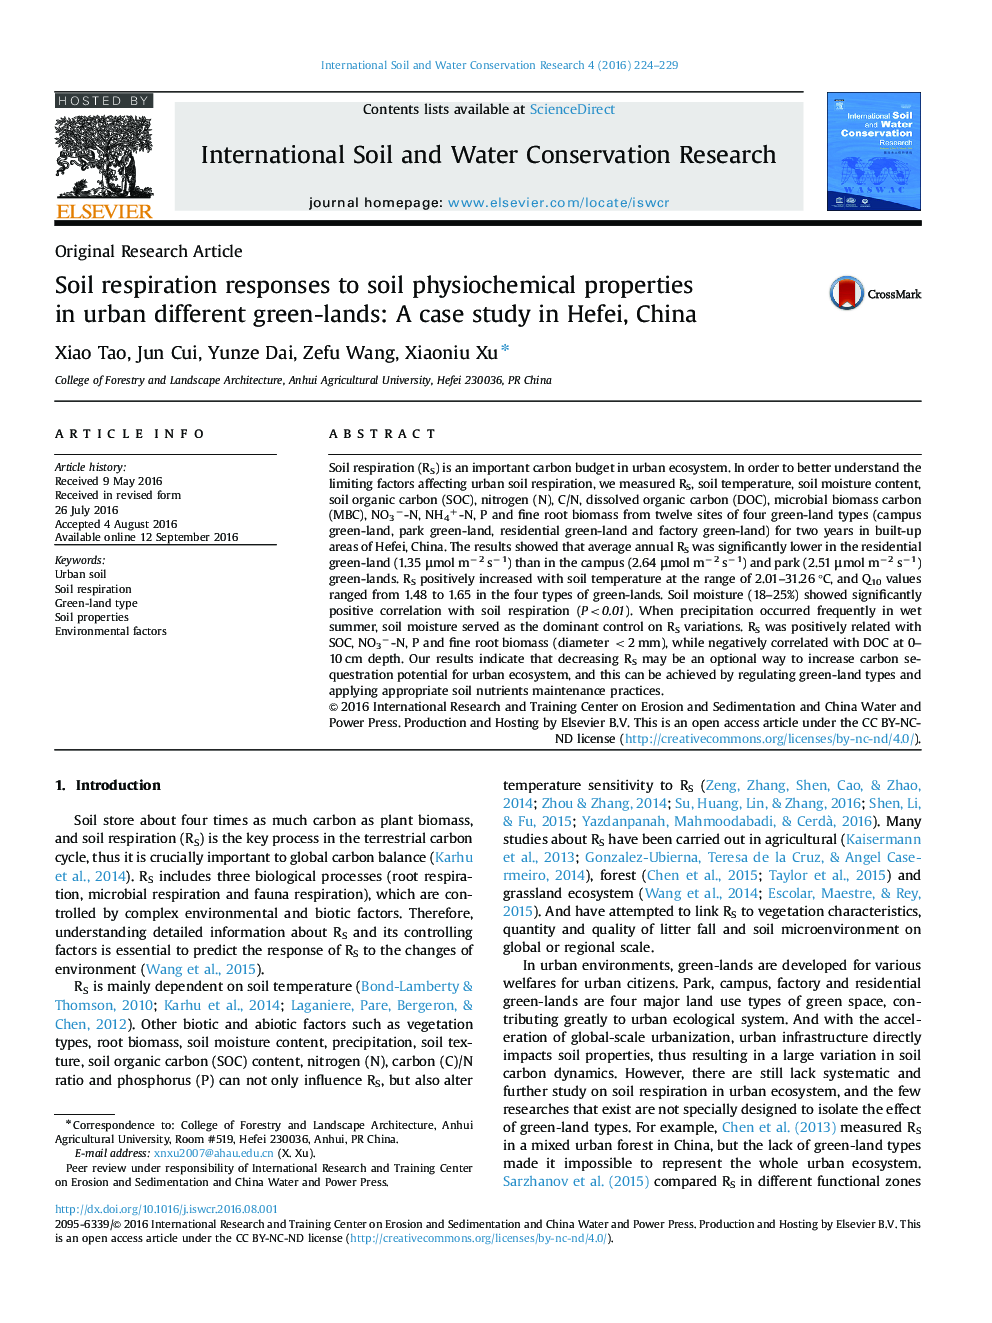 Soil respiration responses to soil physiochemical properties in urban different green-lands: A case study in Hefei, China 